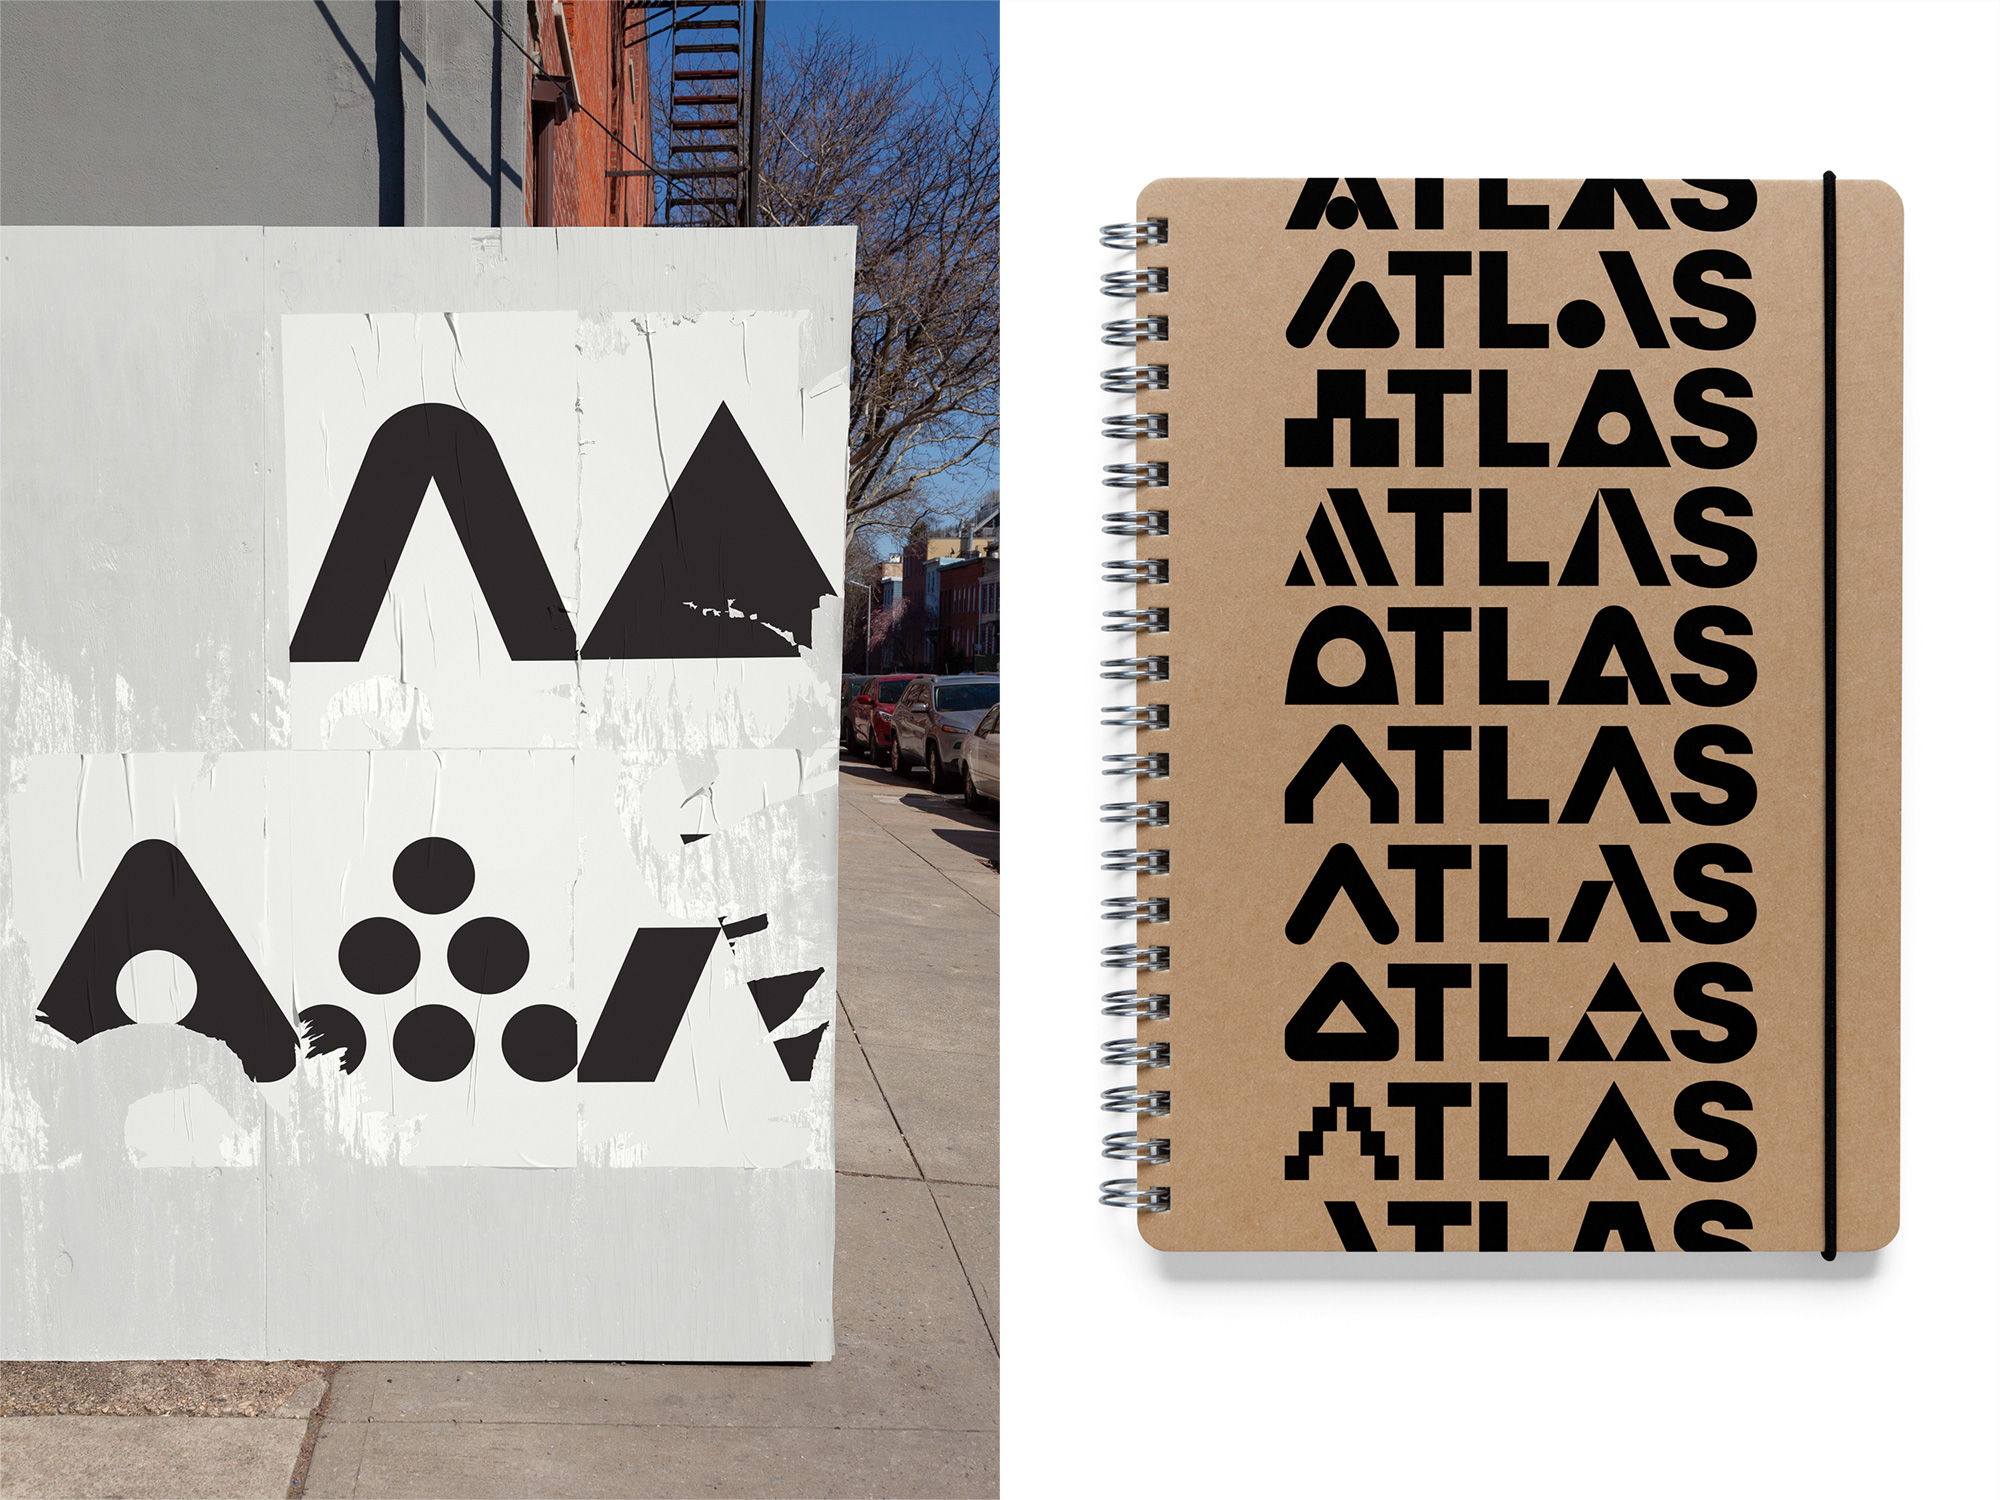 New Logo and Identity for ATLAS by Berger & Föhr